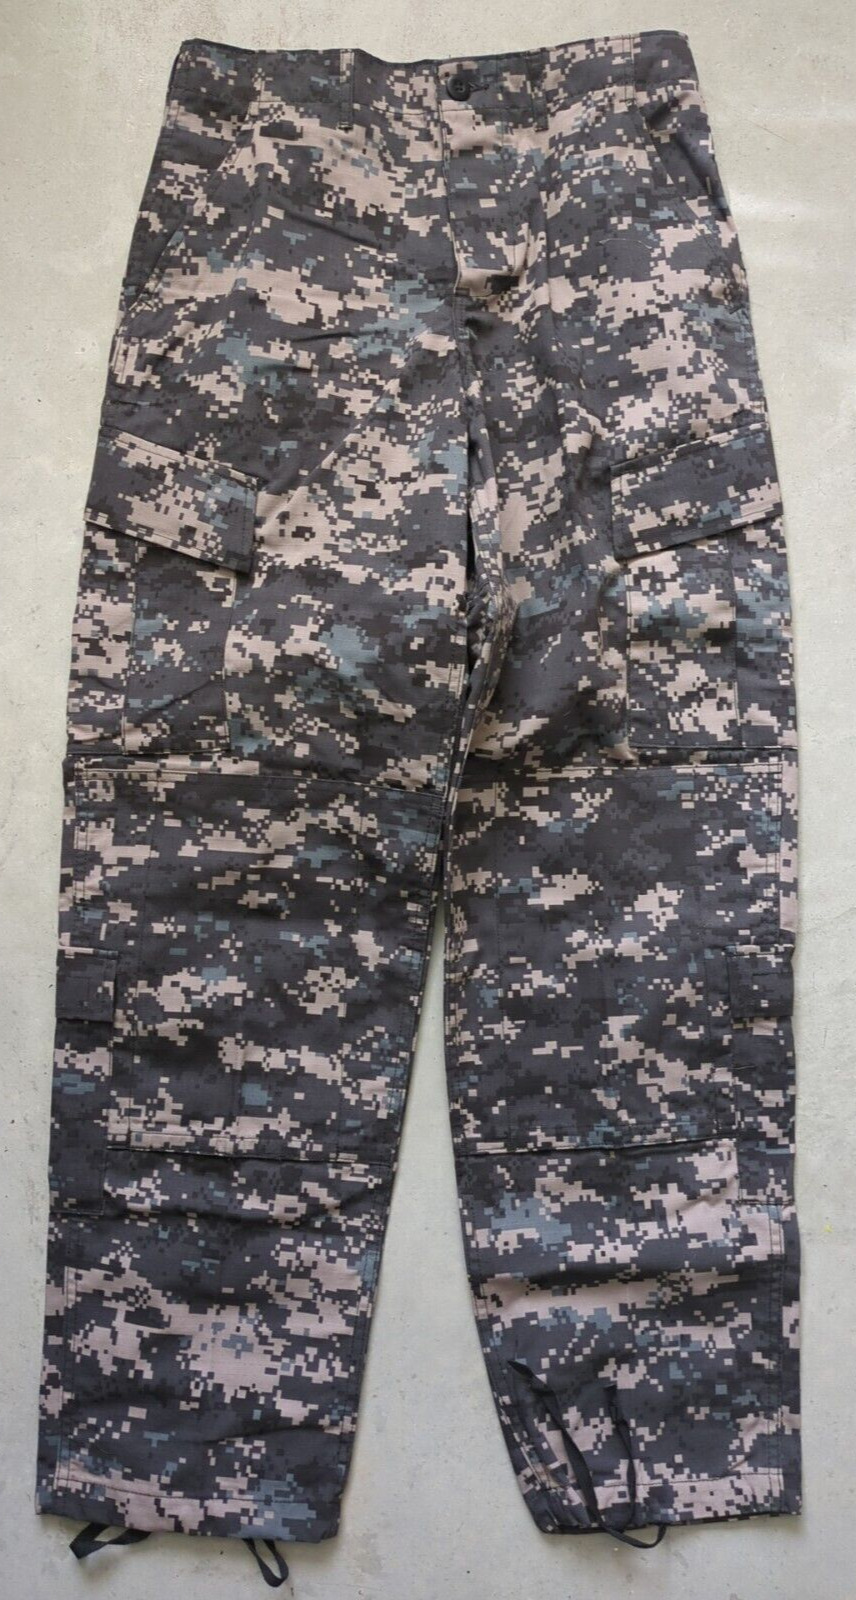 Propper Military Style Subdued Urban Digital Camo Pants Trousers Small Regular